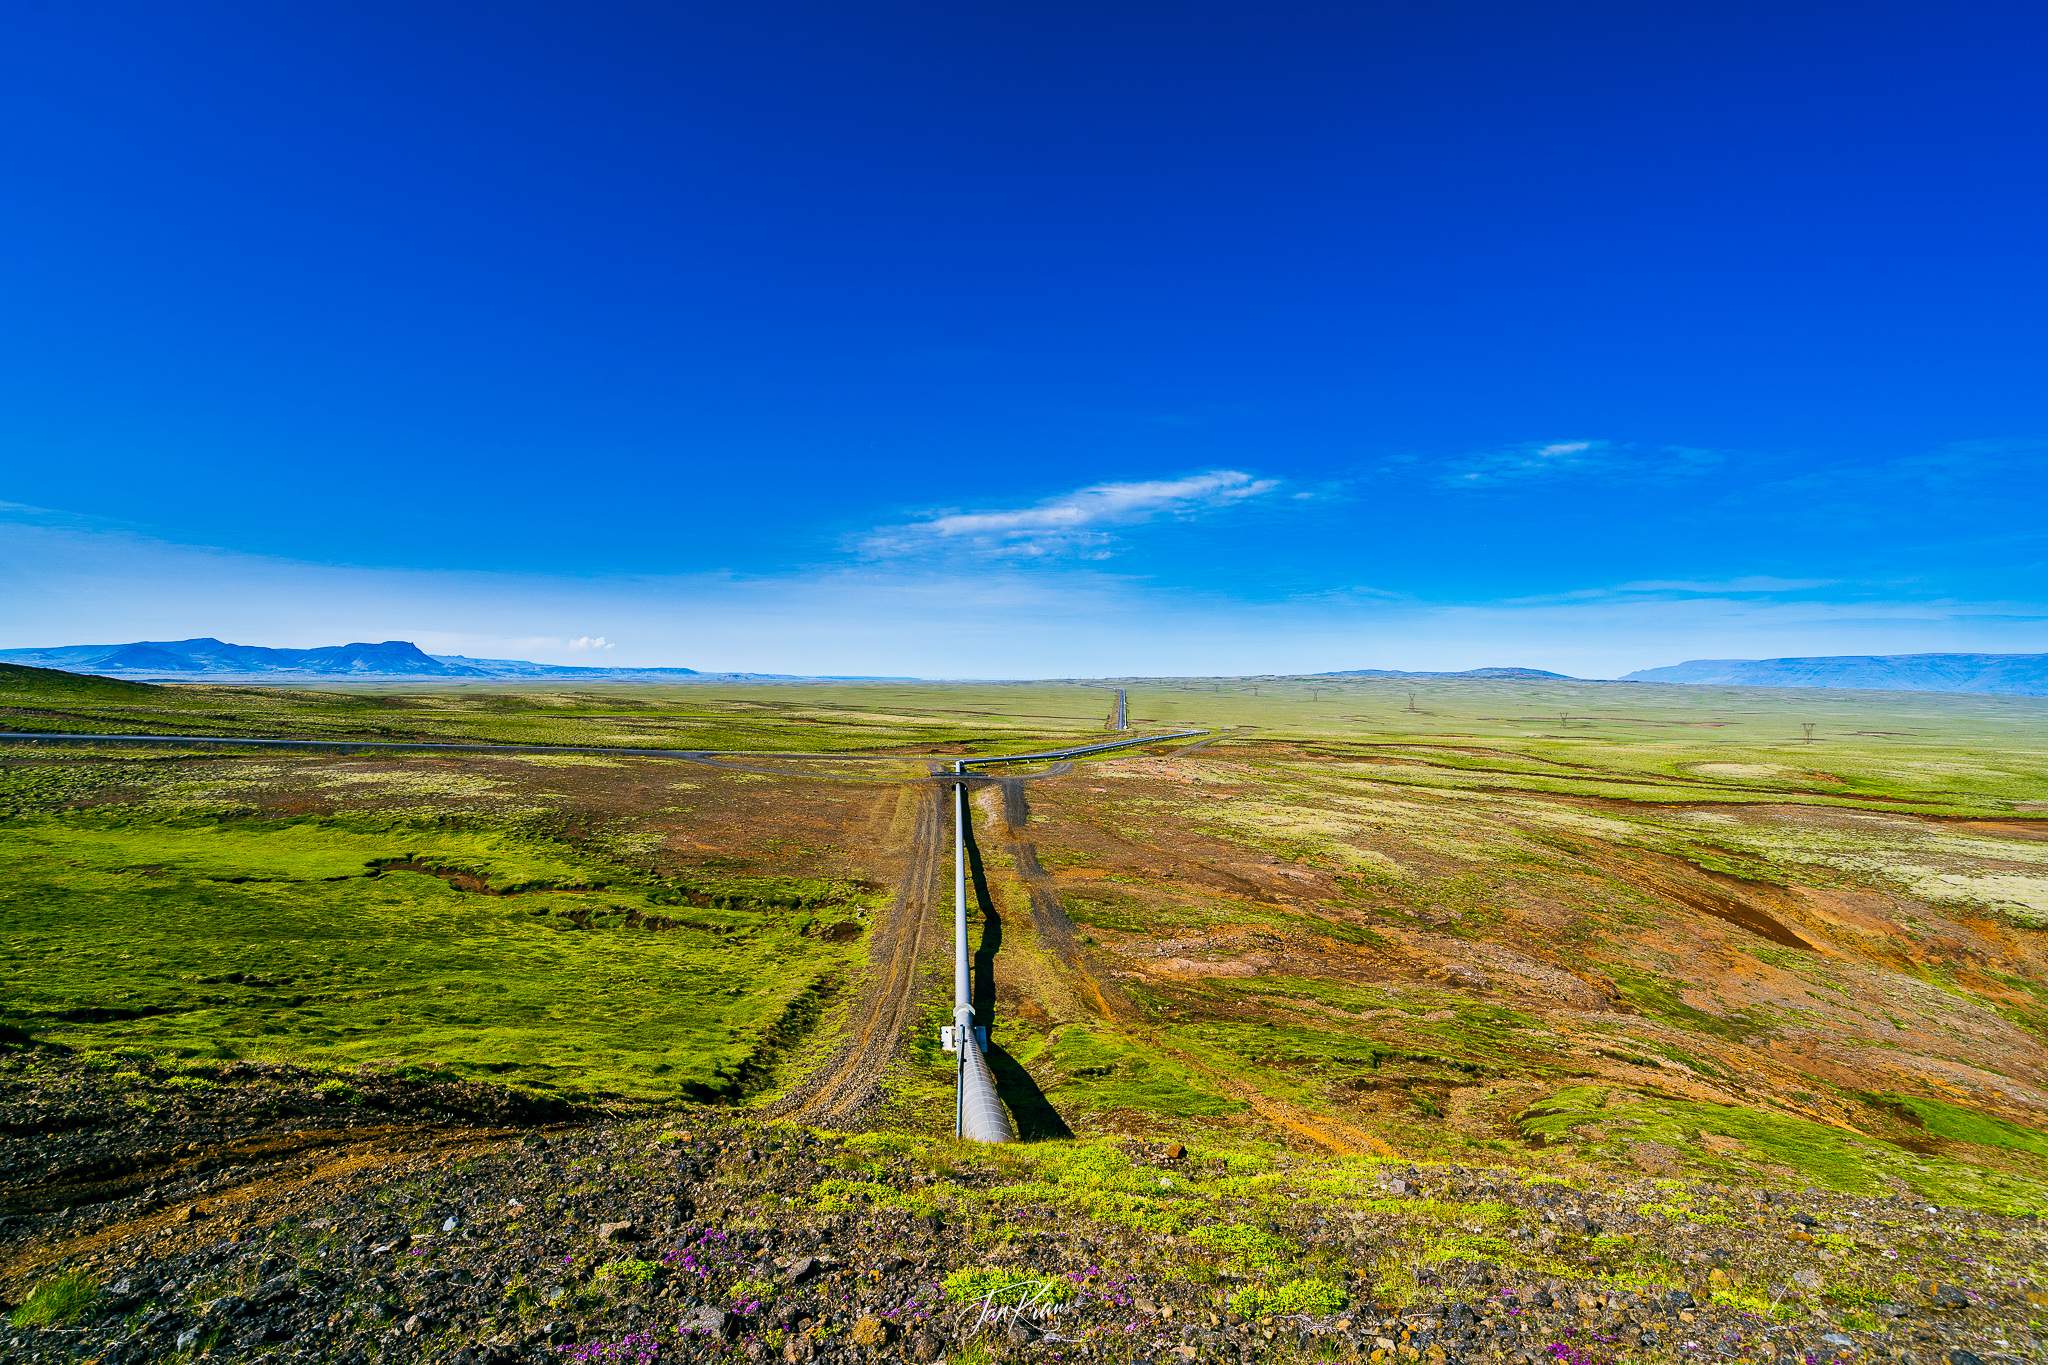 The vast space with some heat-transporting pipeline cutting through it, view from Road 435, west of Reykjavík, Iceland